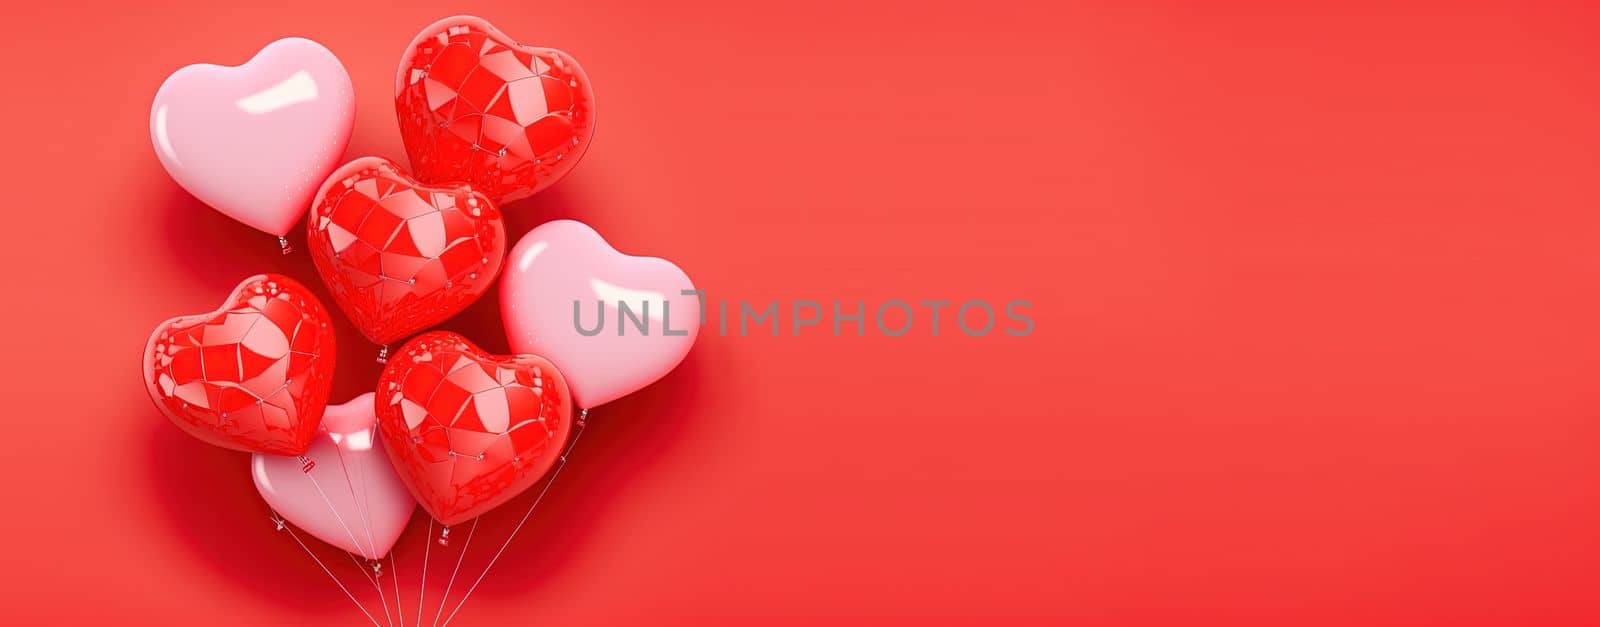 Happy valentines day banner background with shiny red 3d heart shape by templator